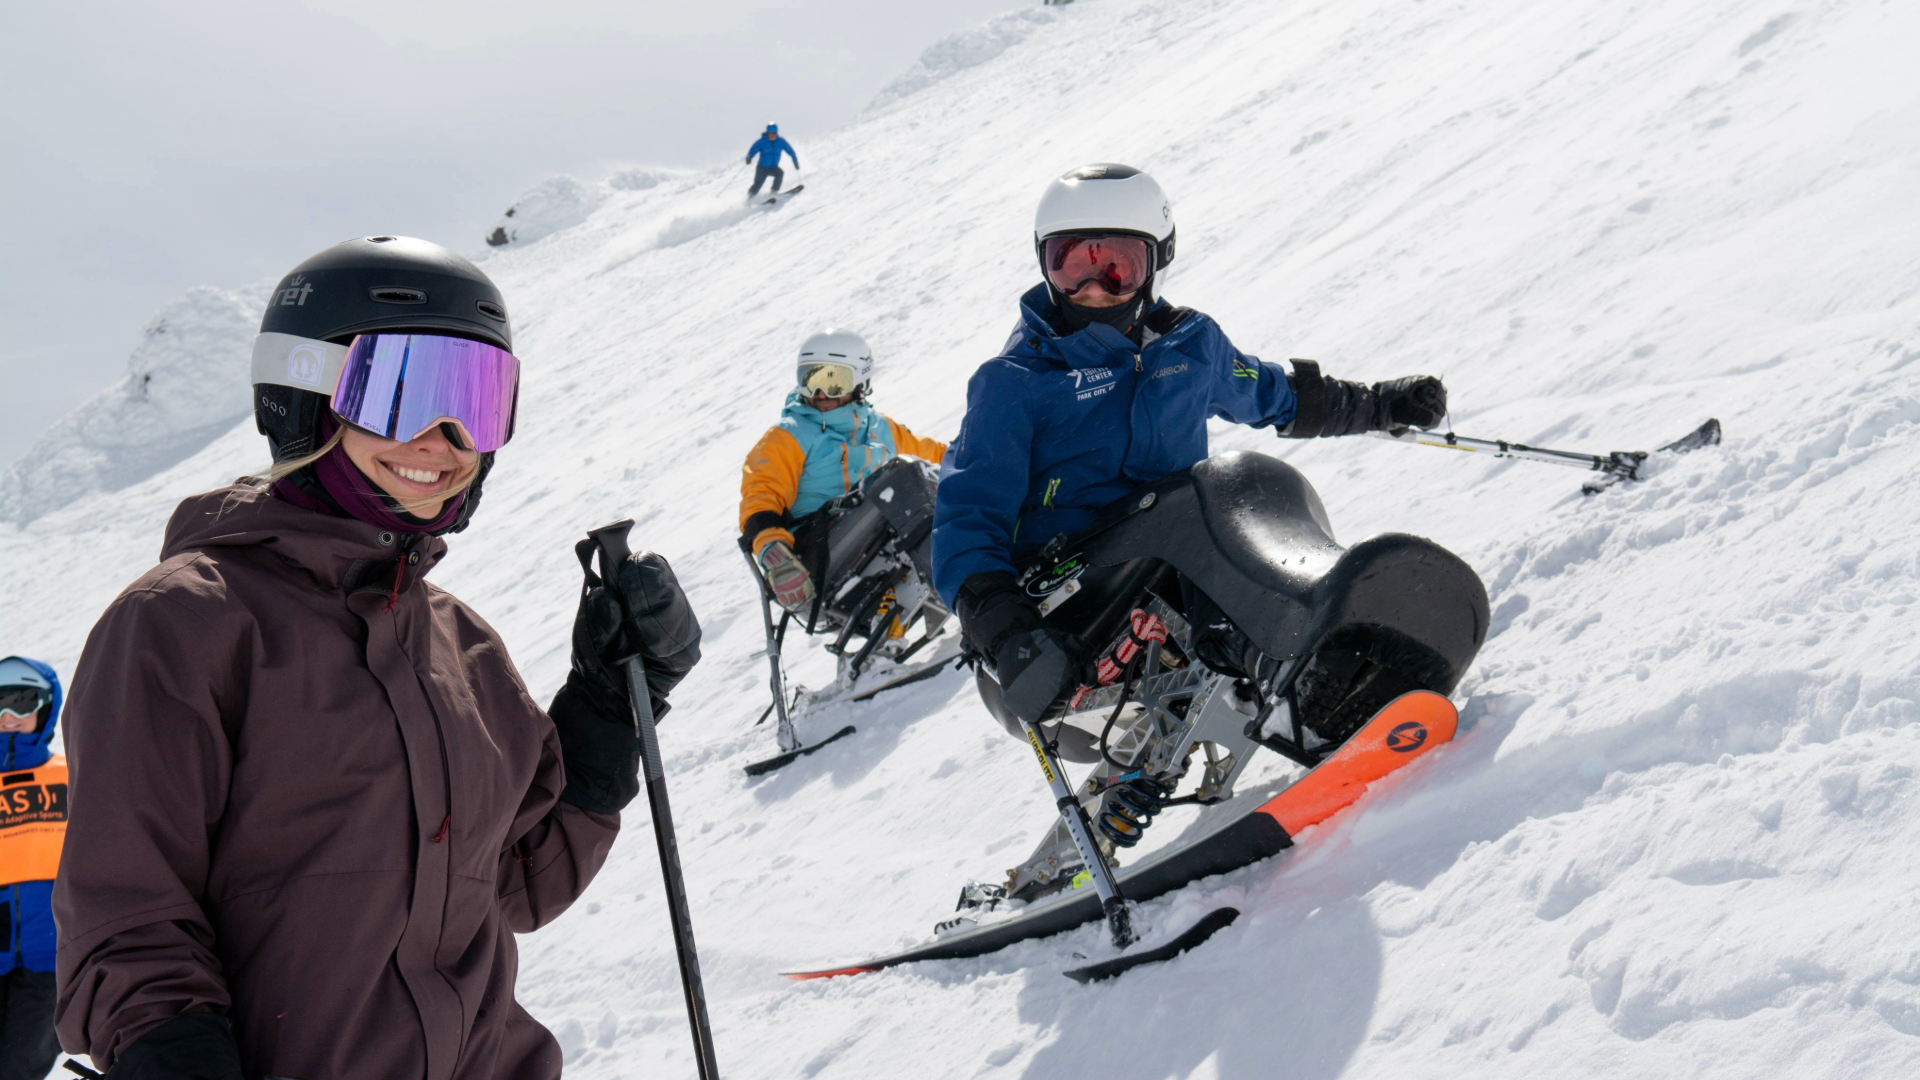 A 2-track skier supporting their partner in a sit-ski smiles at the camera with close behind them their partner and another sit-skier are stopped and angled on the steep slope. 